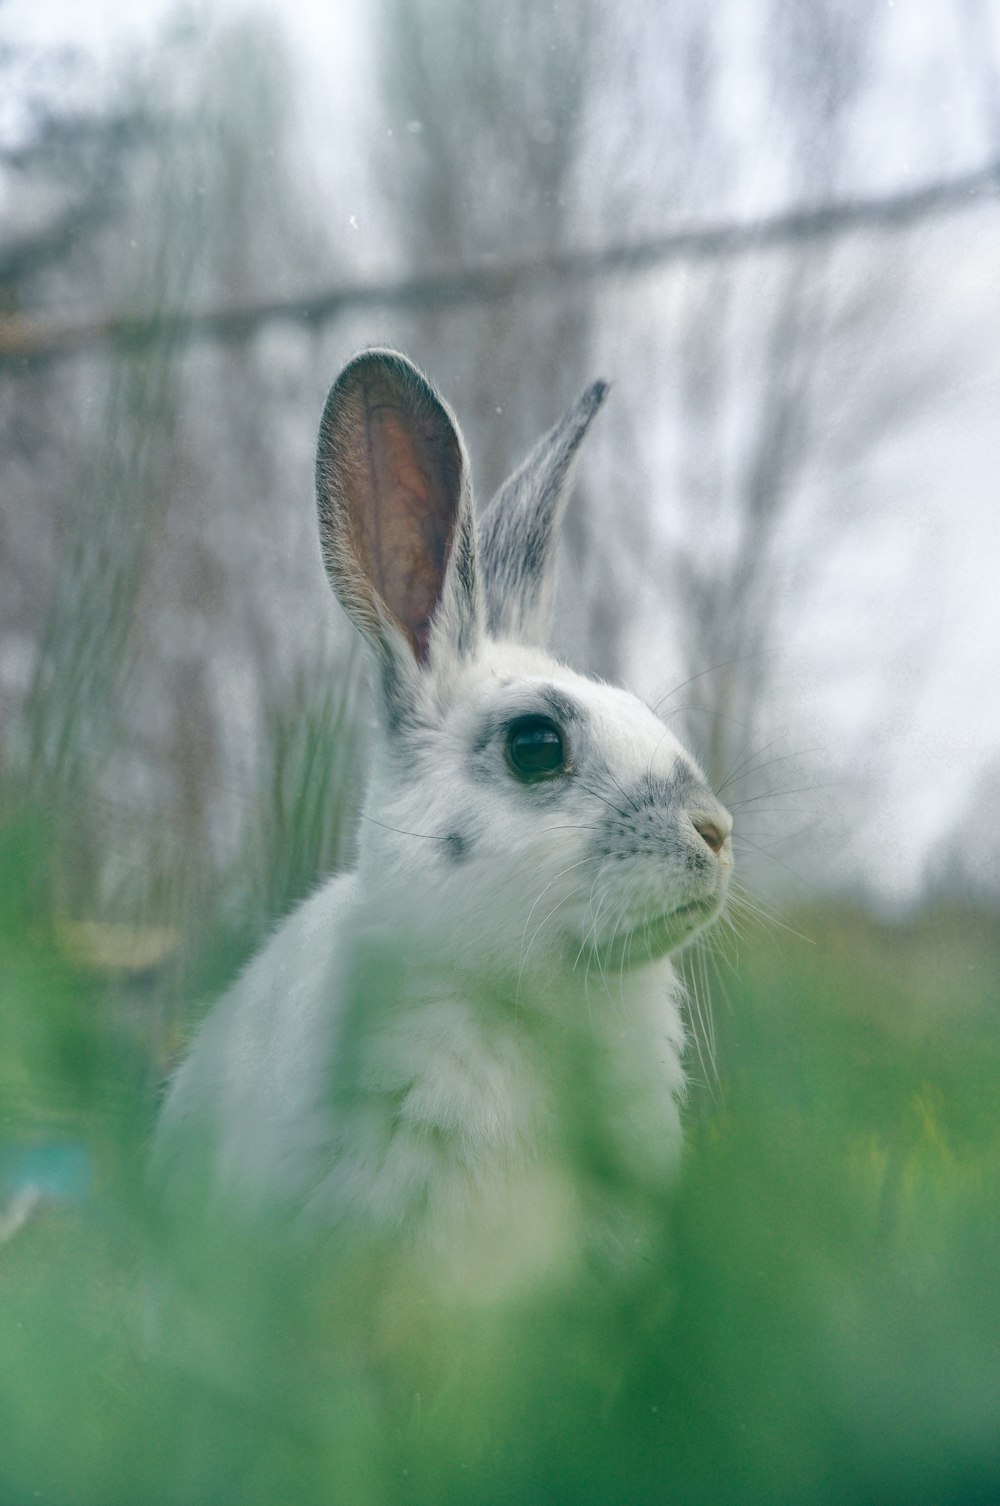 a white rabbit is sitting in the grass